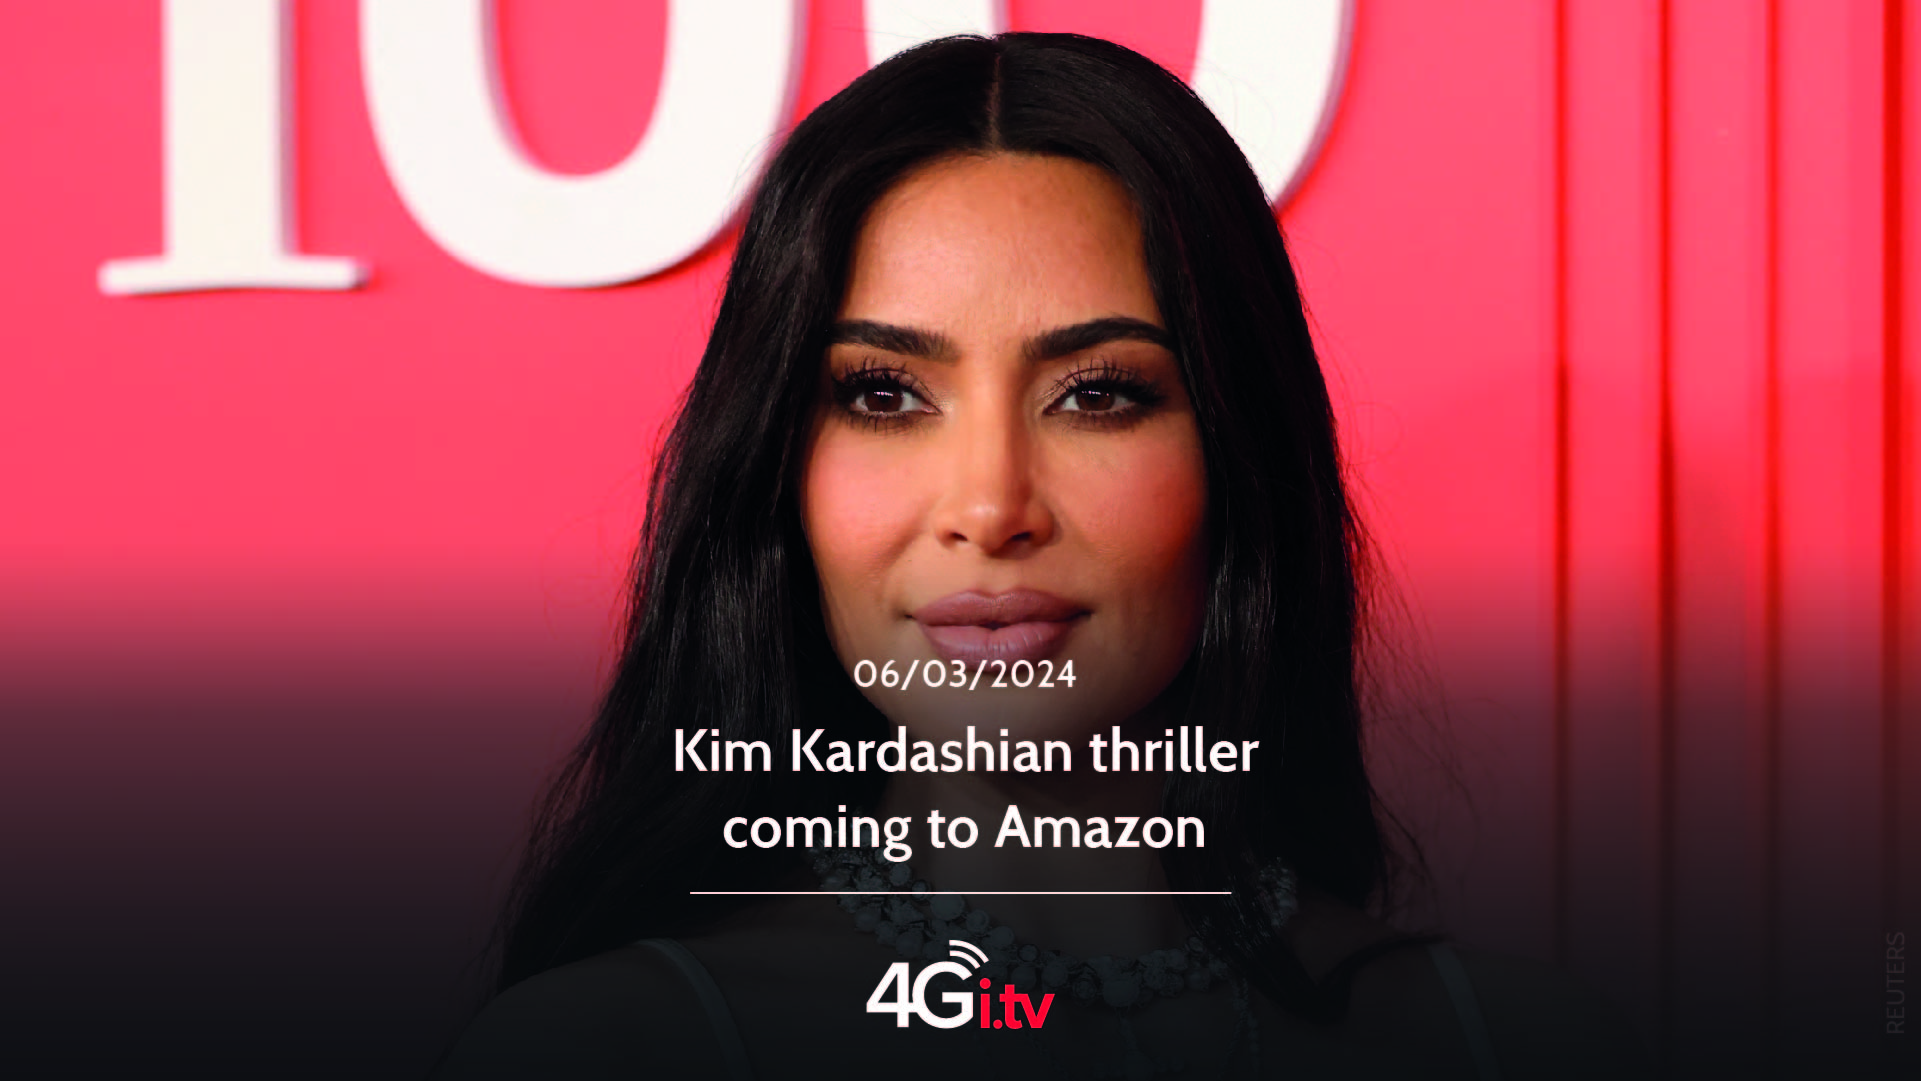 Read more about the article Kim Kardashian thriller coming to Amazon 